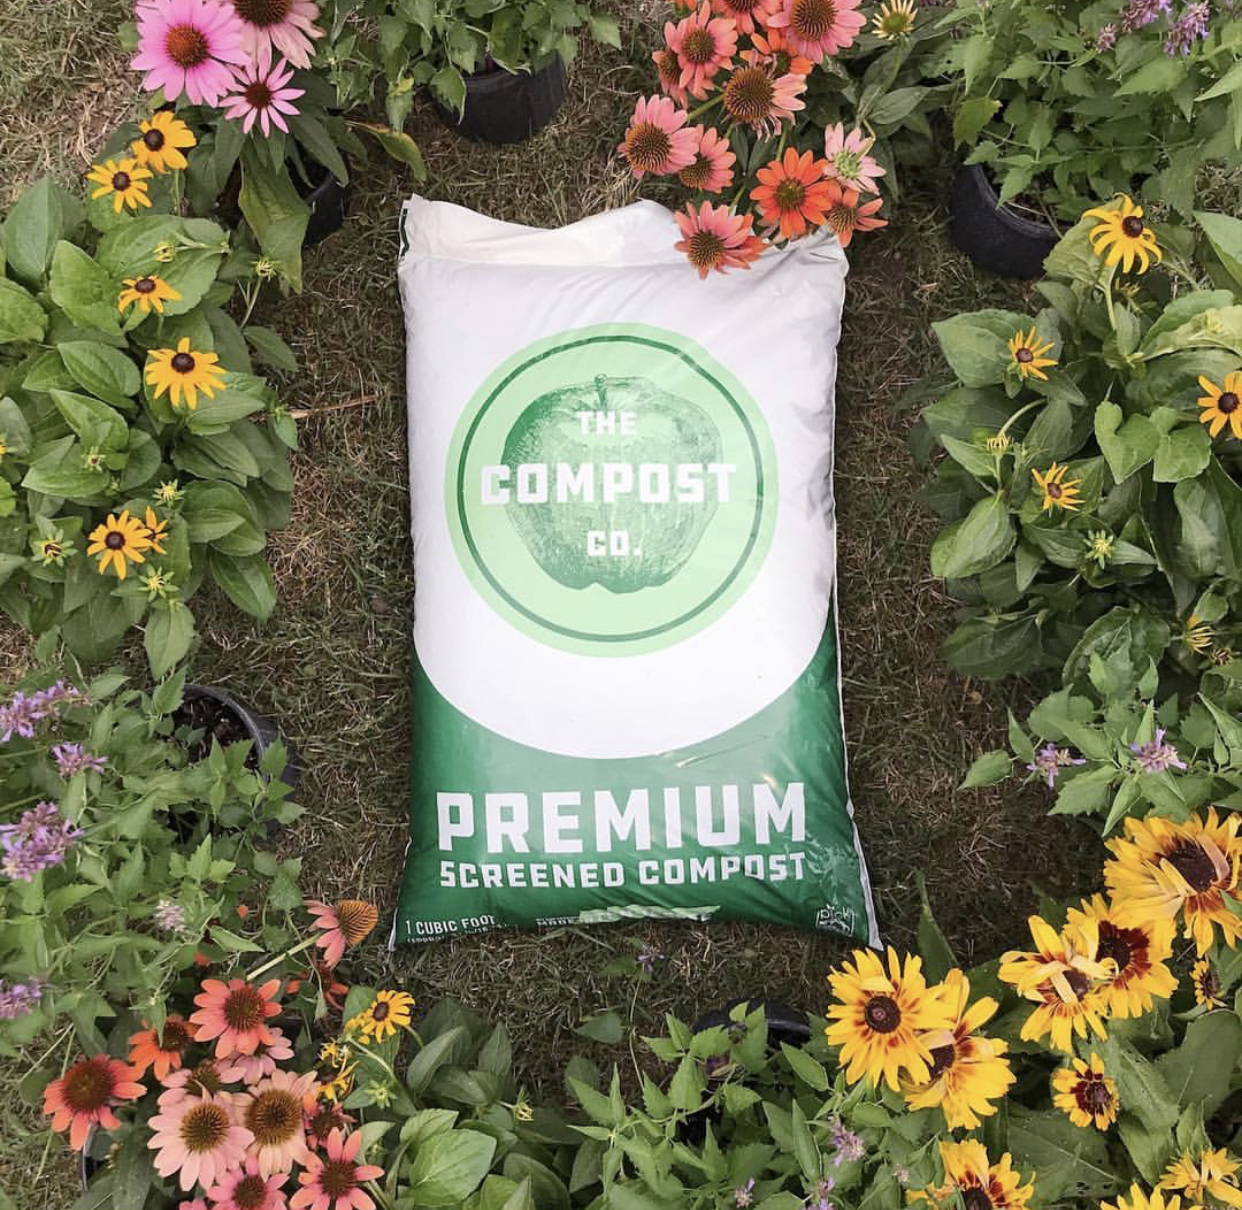 Bagged Premium Screened Compost The Compost Company